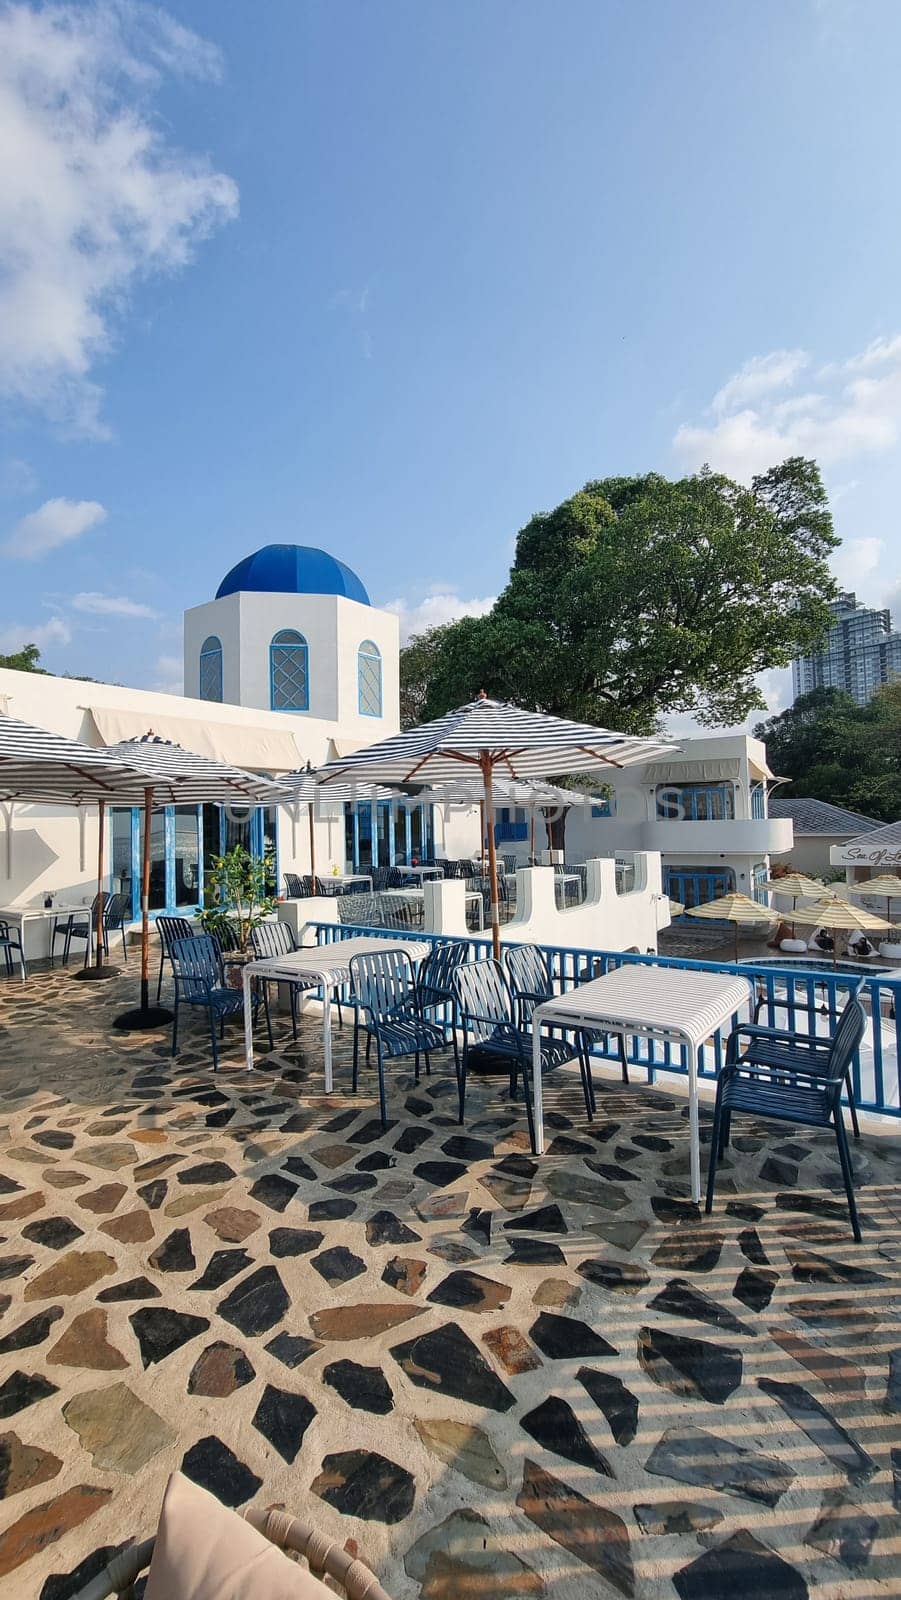 A peaceful patio area with tables and chairs set against a serene blue dome in the background by fokkebok